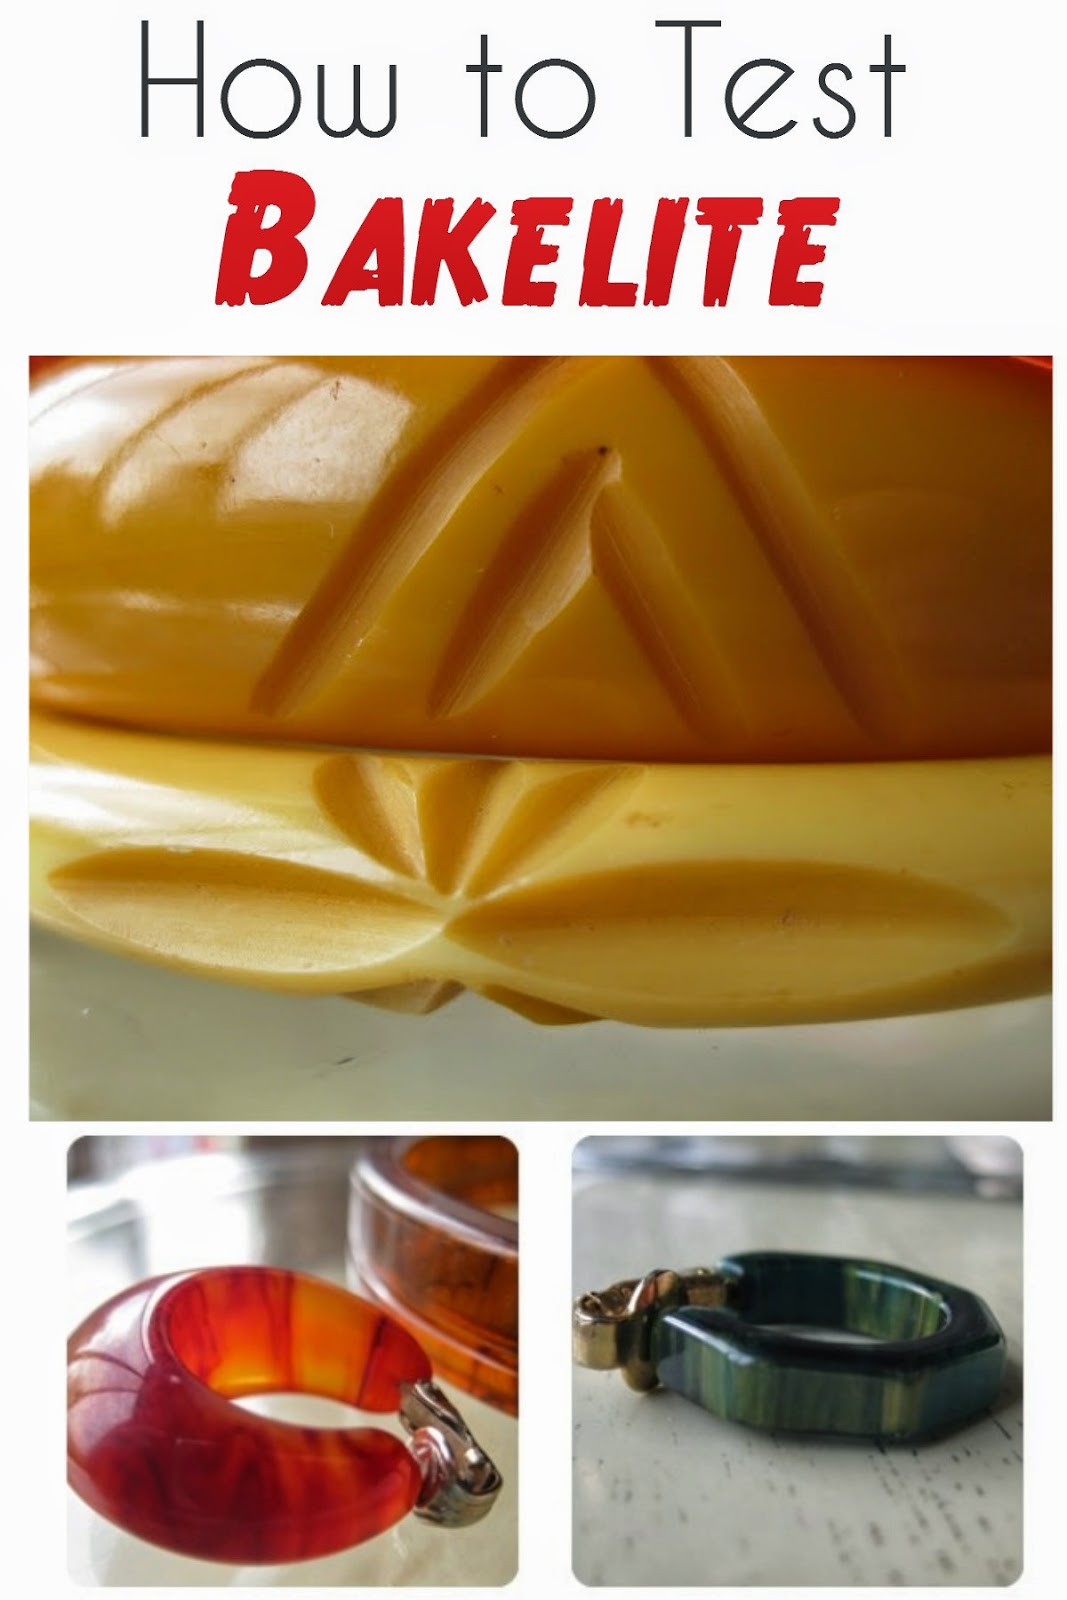 how to test and identify vintage bakelite jewelry from Va-Voom Vintage